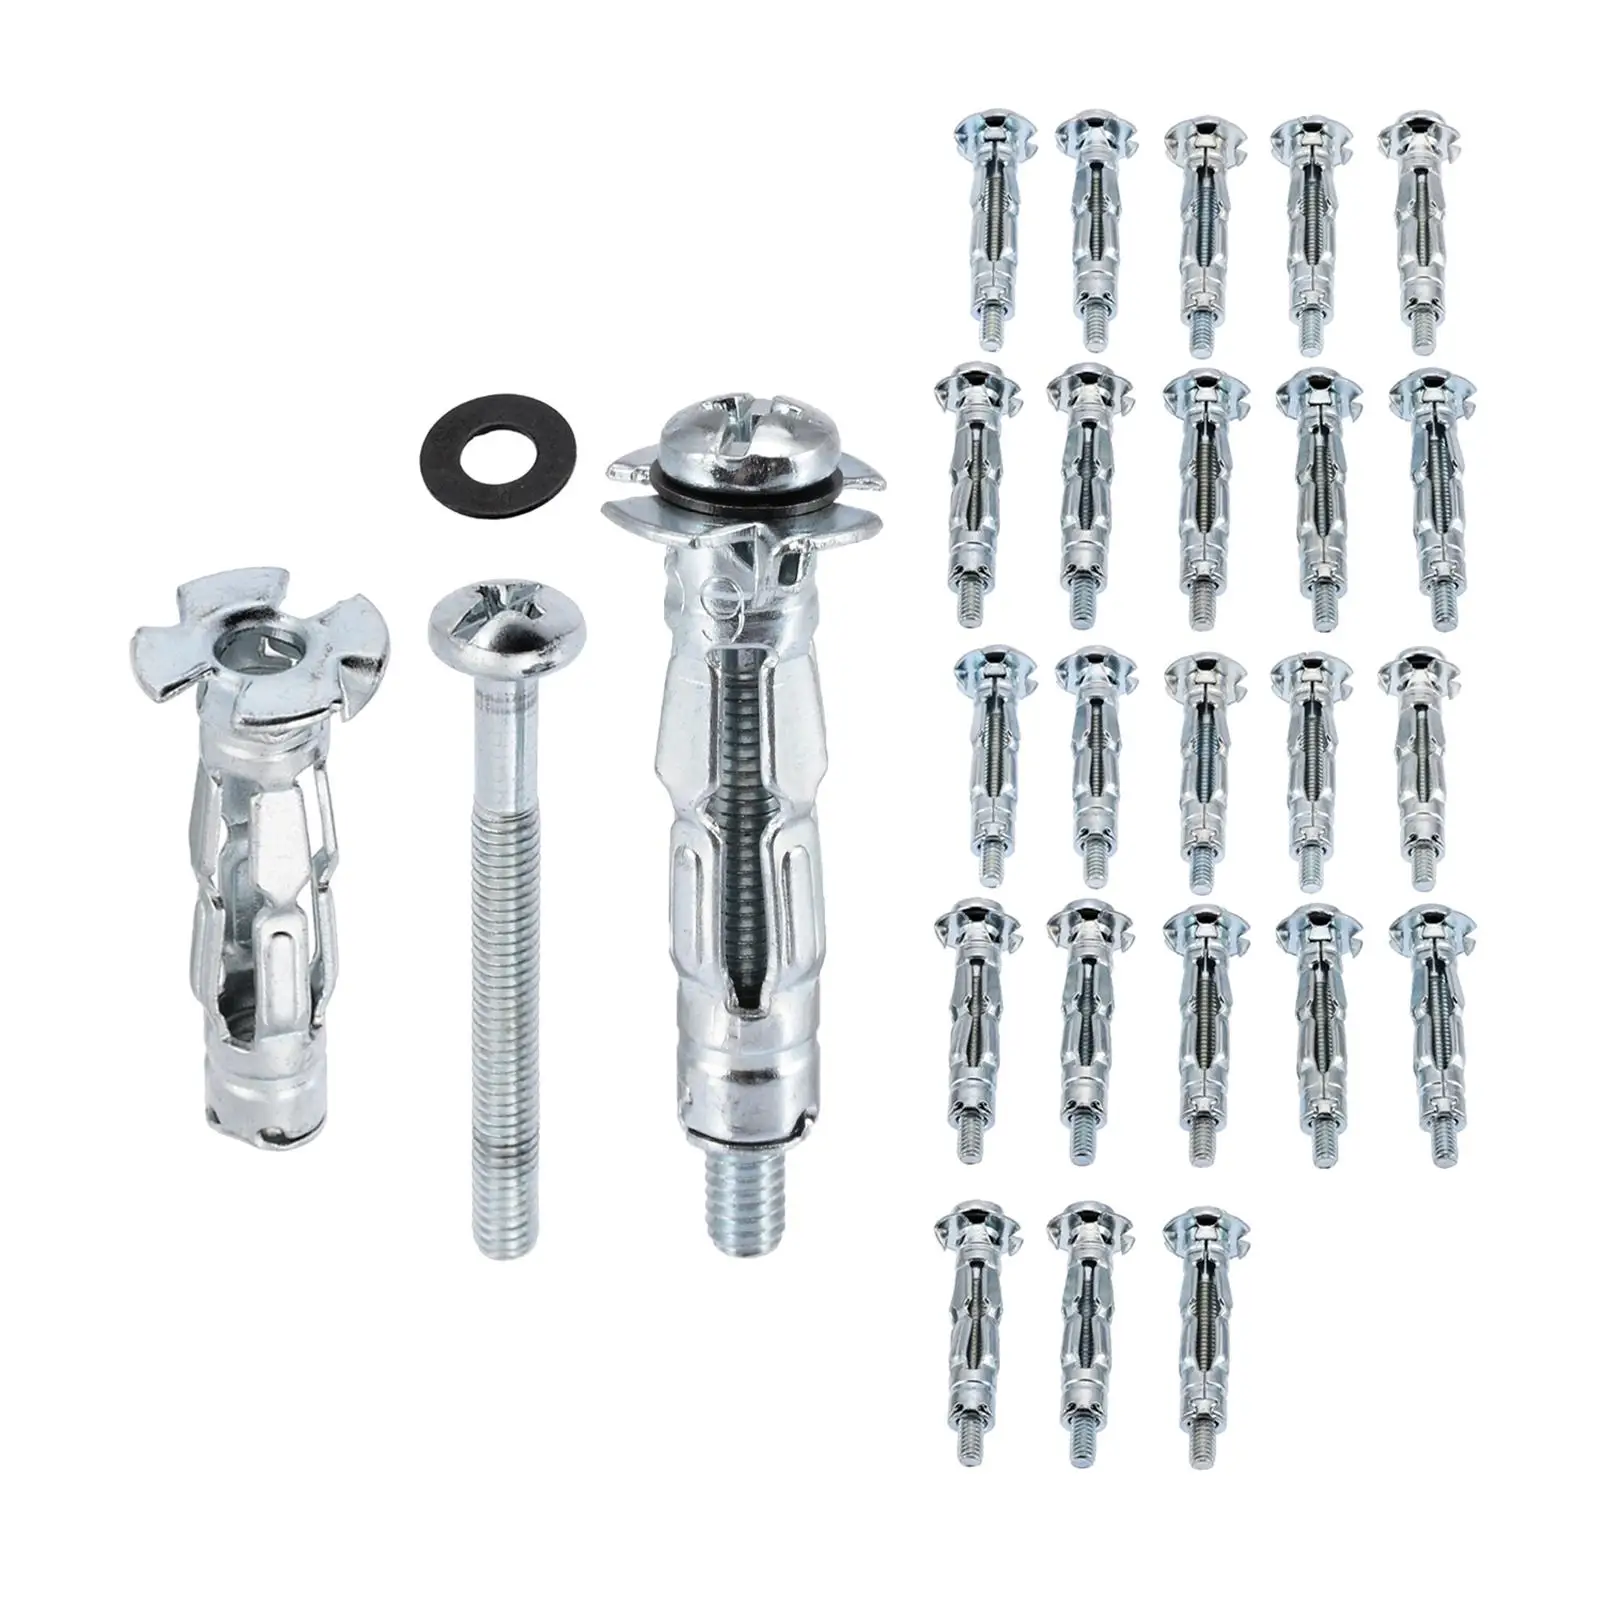 25Pcs Hollow Wall Anchors Metal Plasterboard Cavity Wall Fixings Anchors Plugs Hollow Wall Drive Anchor Screws for Tile